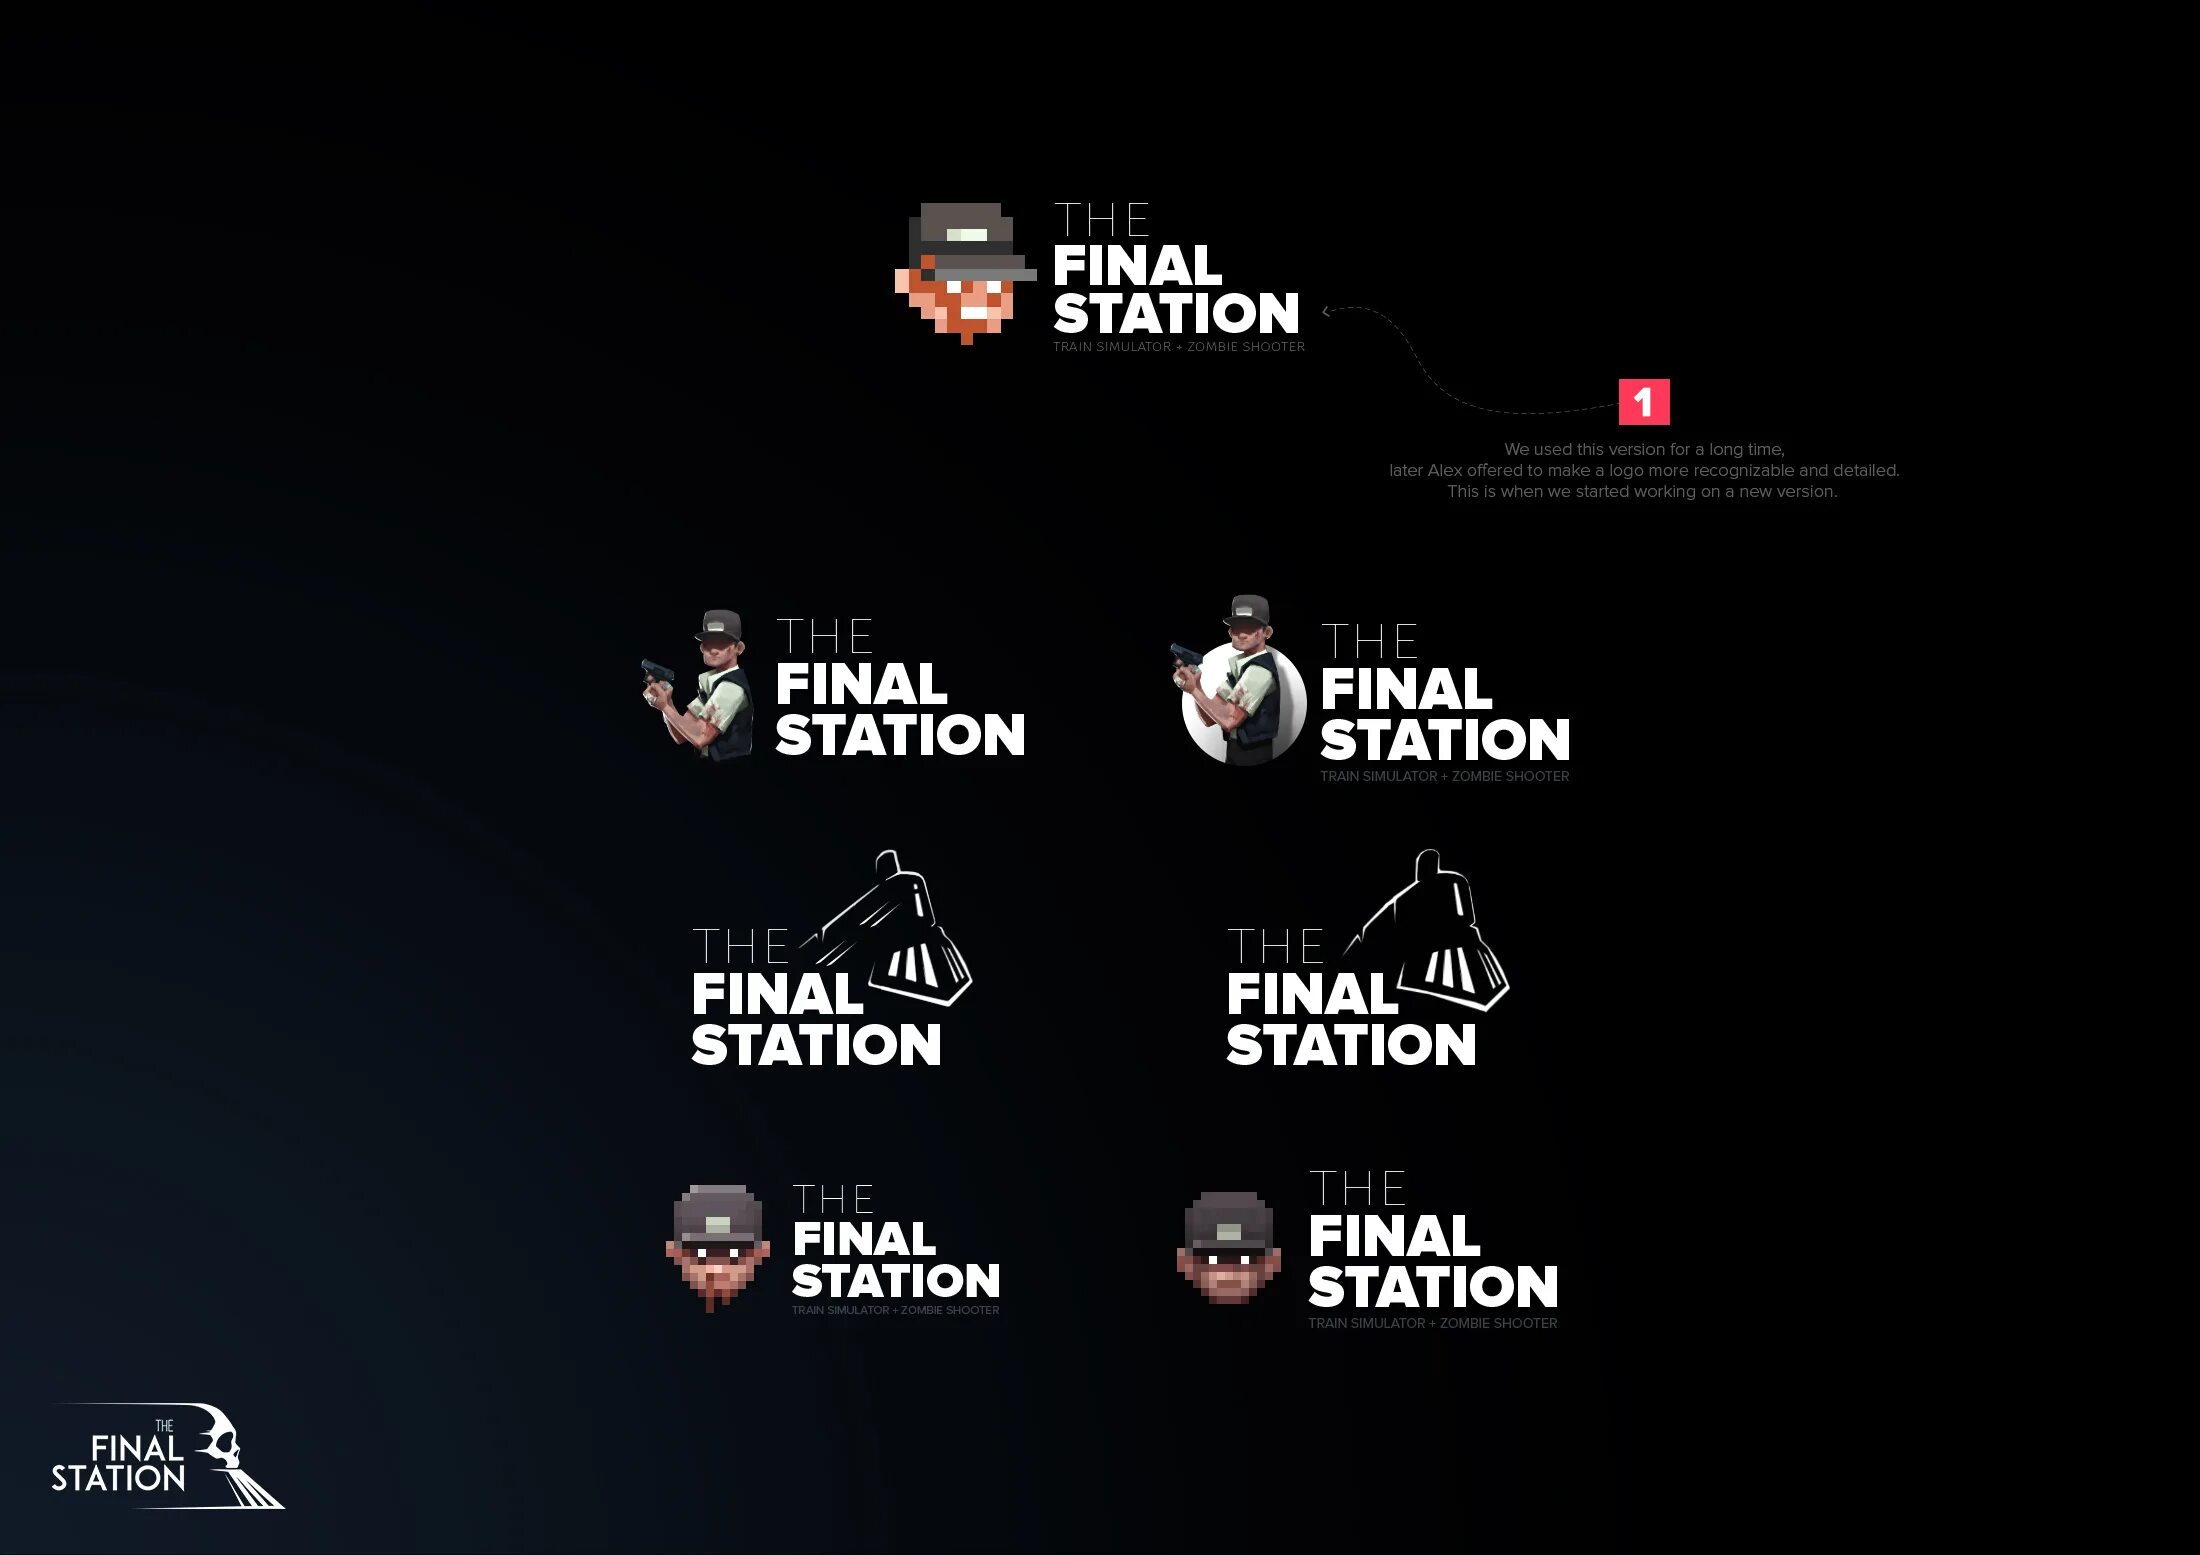 The Final Station. The Final Station артбук. The Final Station Страж. Final Station игра.